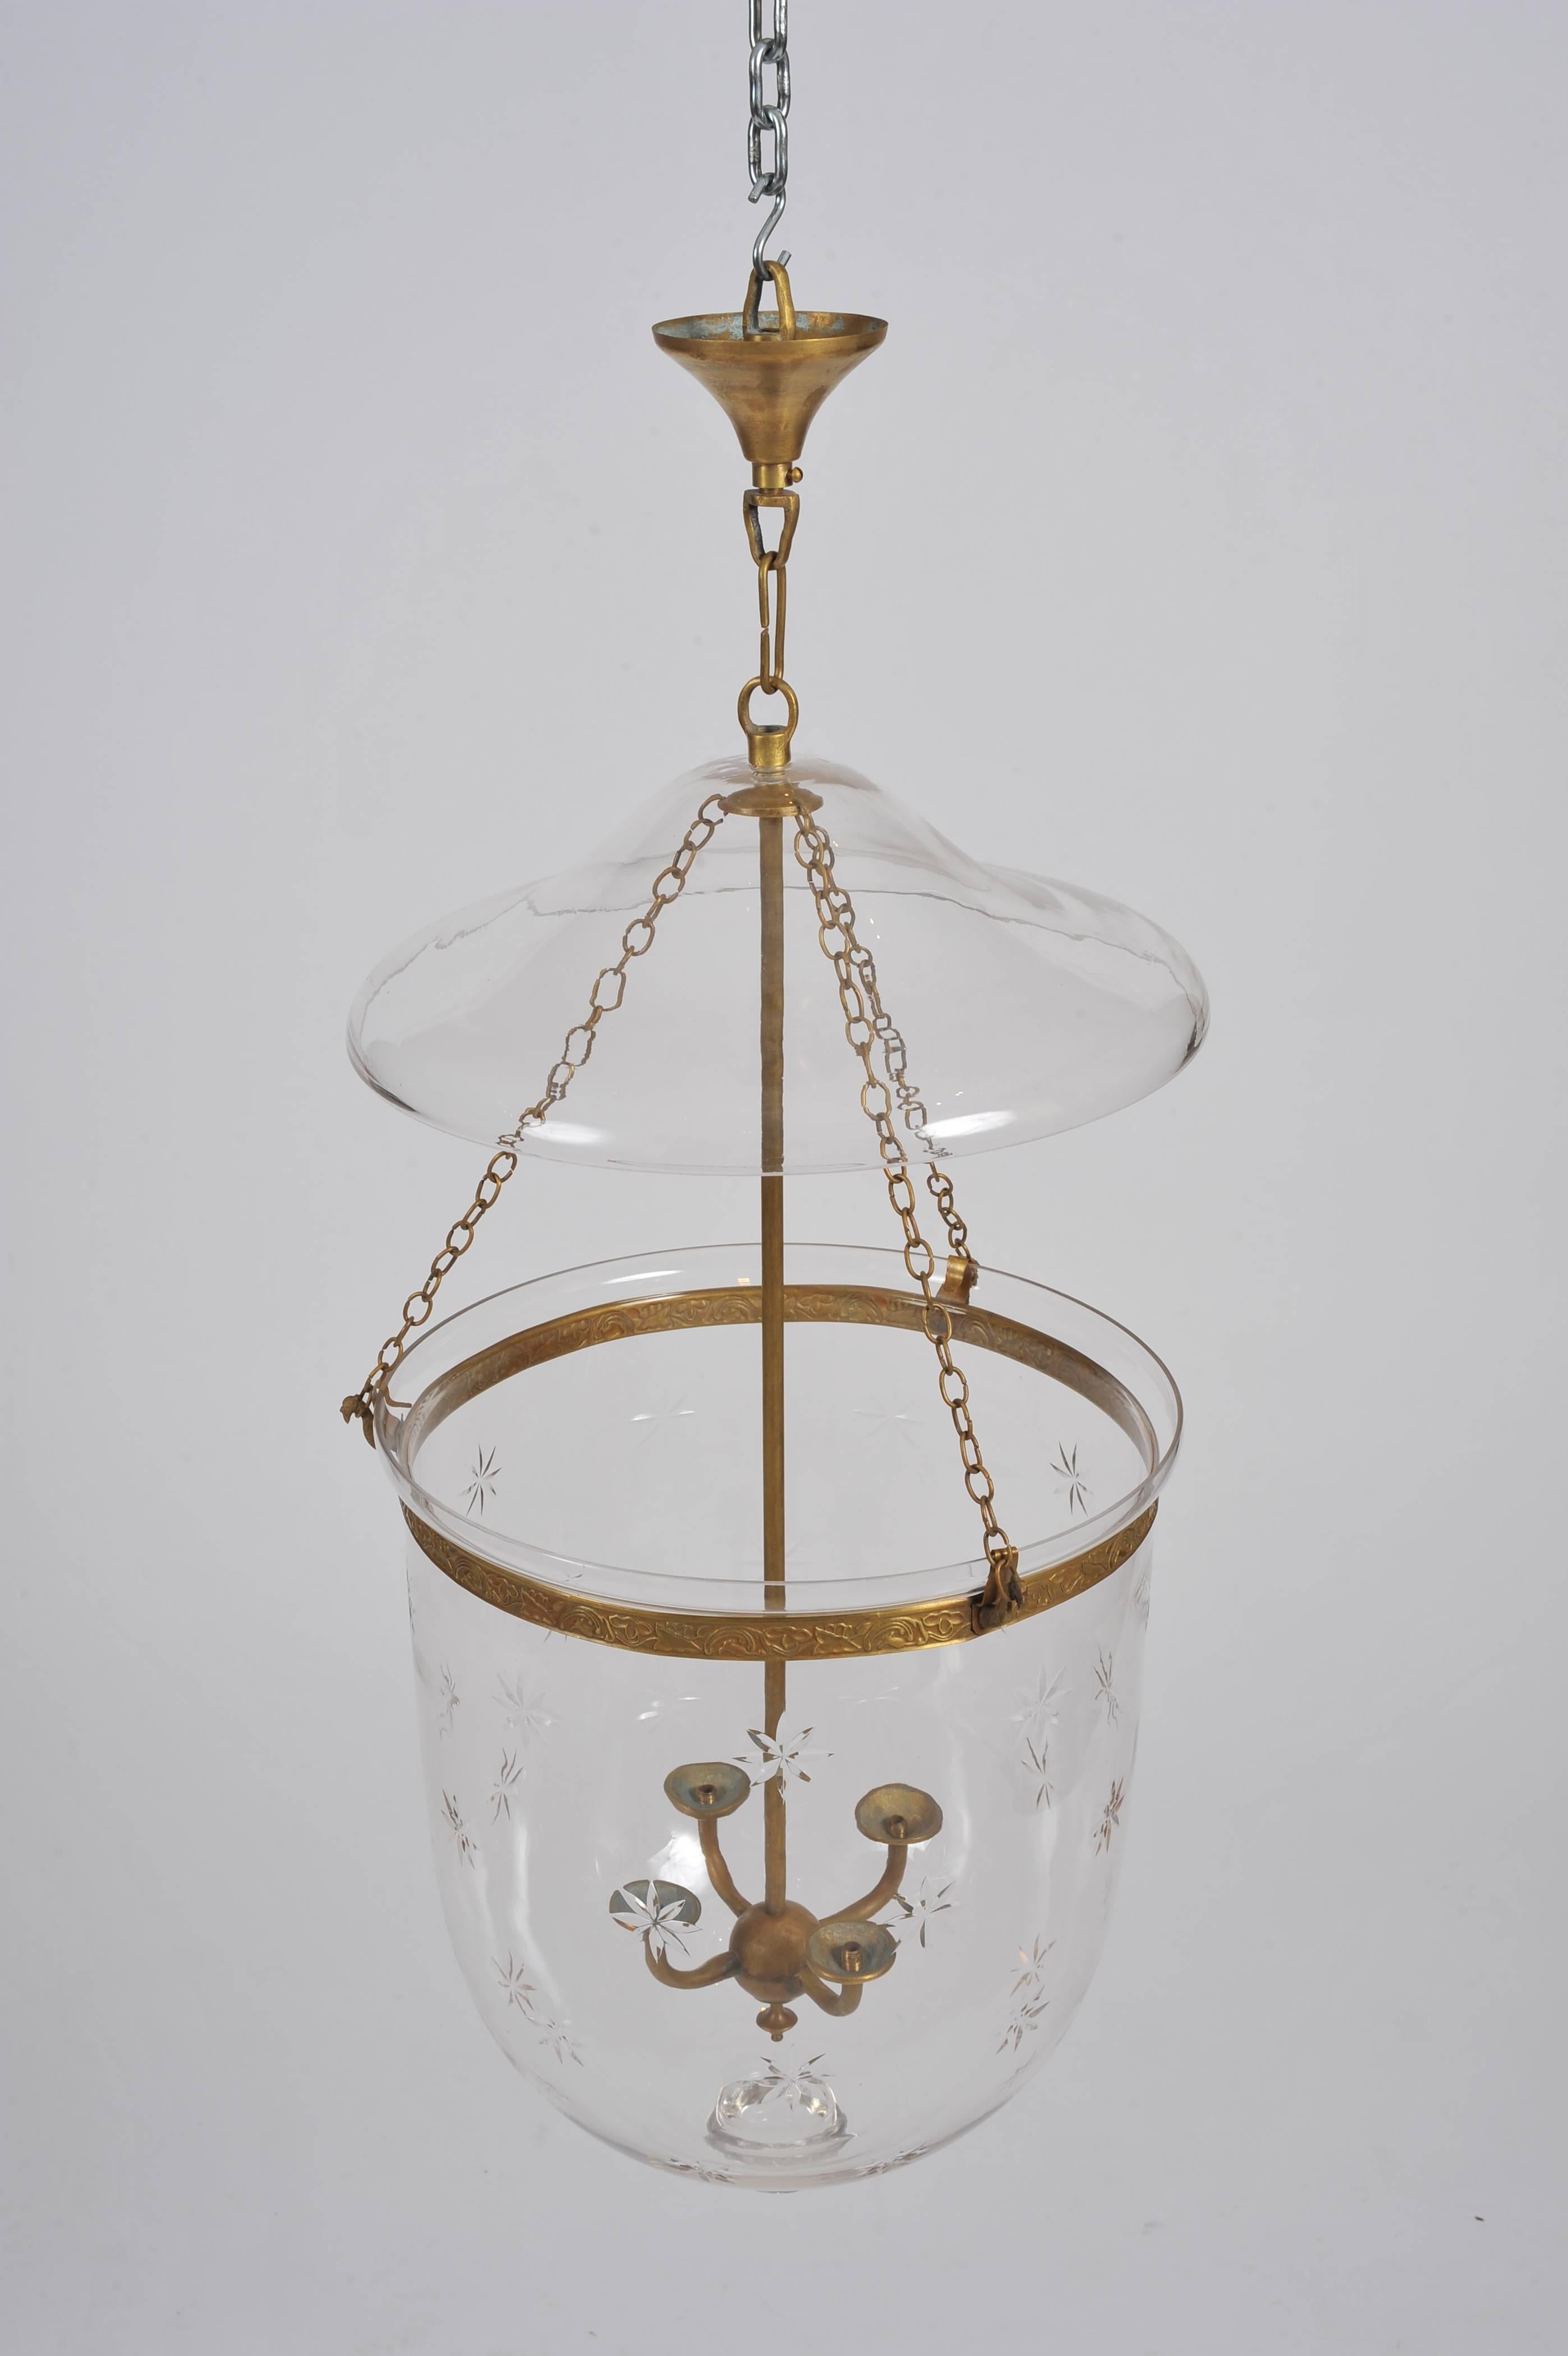 This elegant and well-proportioned handmade glass storm lantern features a blown clear glass shade with a cut glass star design and polished brass hardware. The lantern has a separate top plate and features an internal 4 light fitting. The light